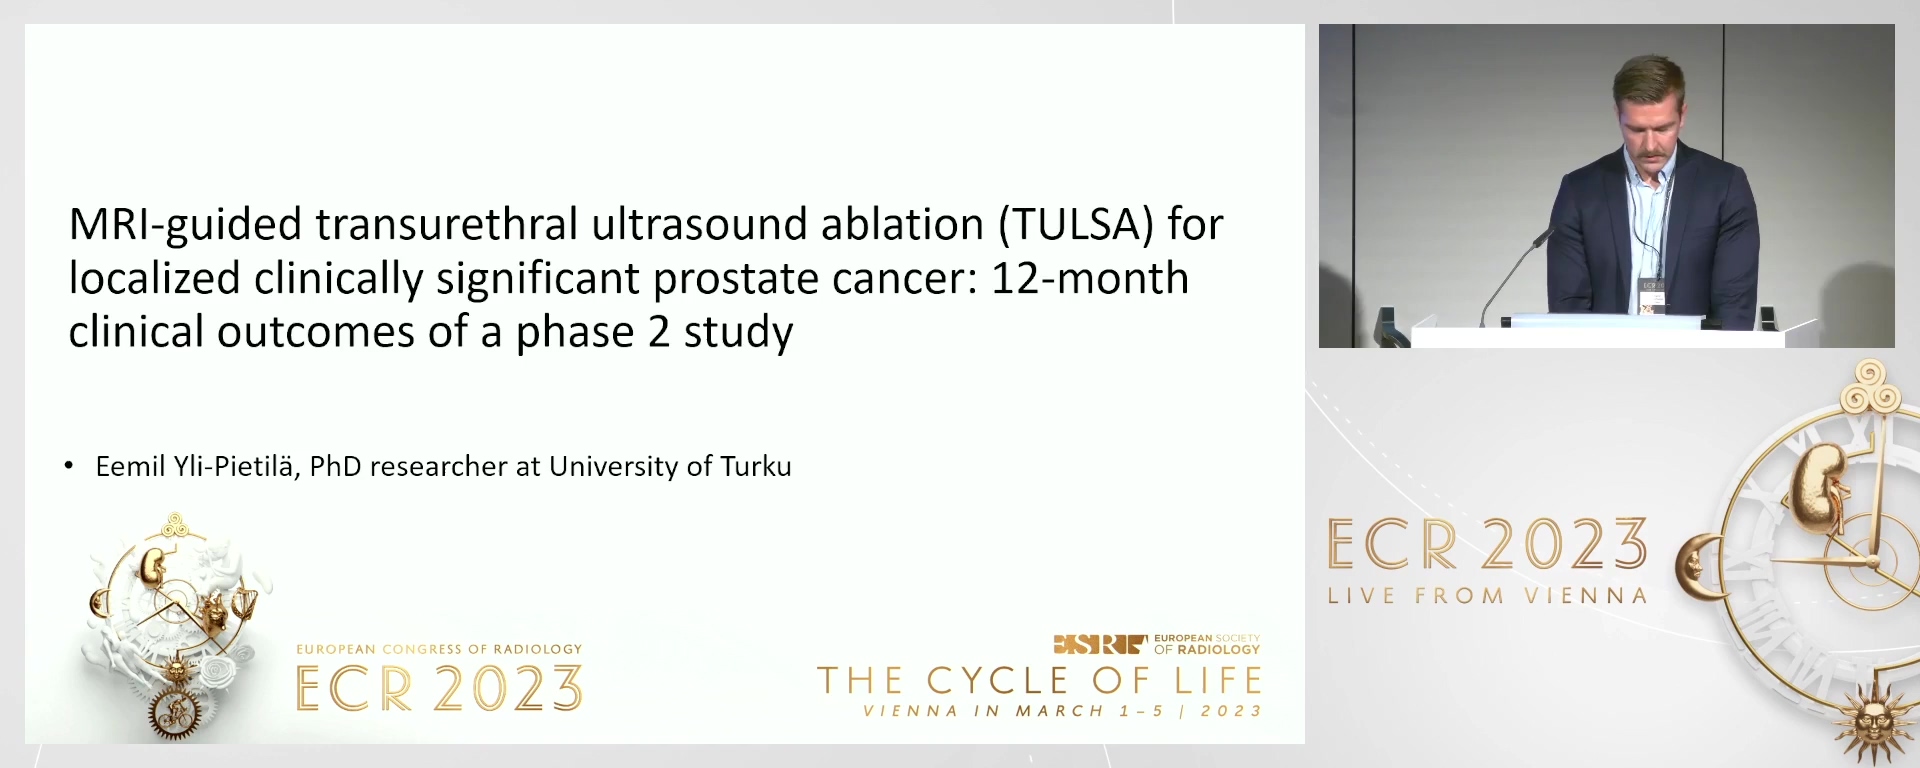 12-month clinical outcomes of MRI-guided transurethral ultrasound ablation for localised prostate cancer